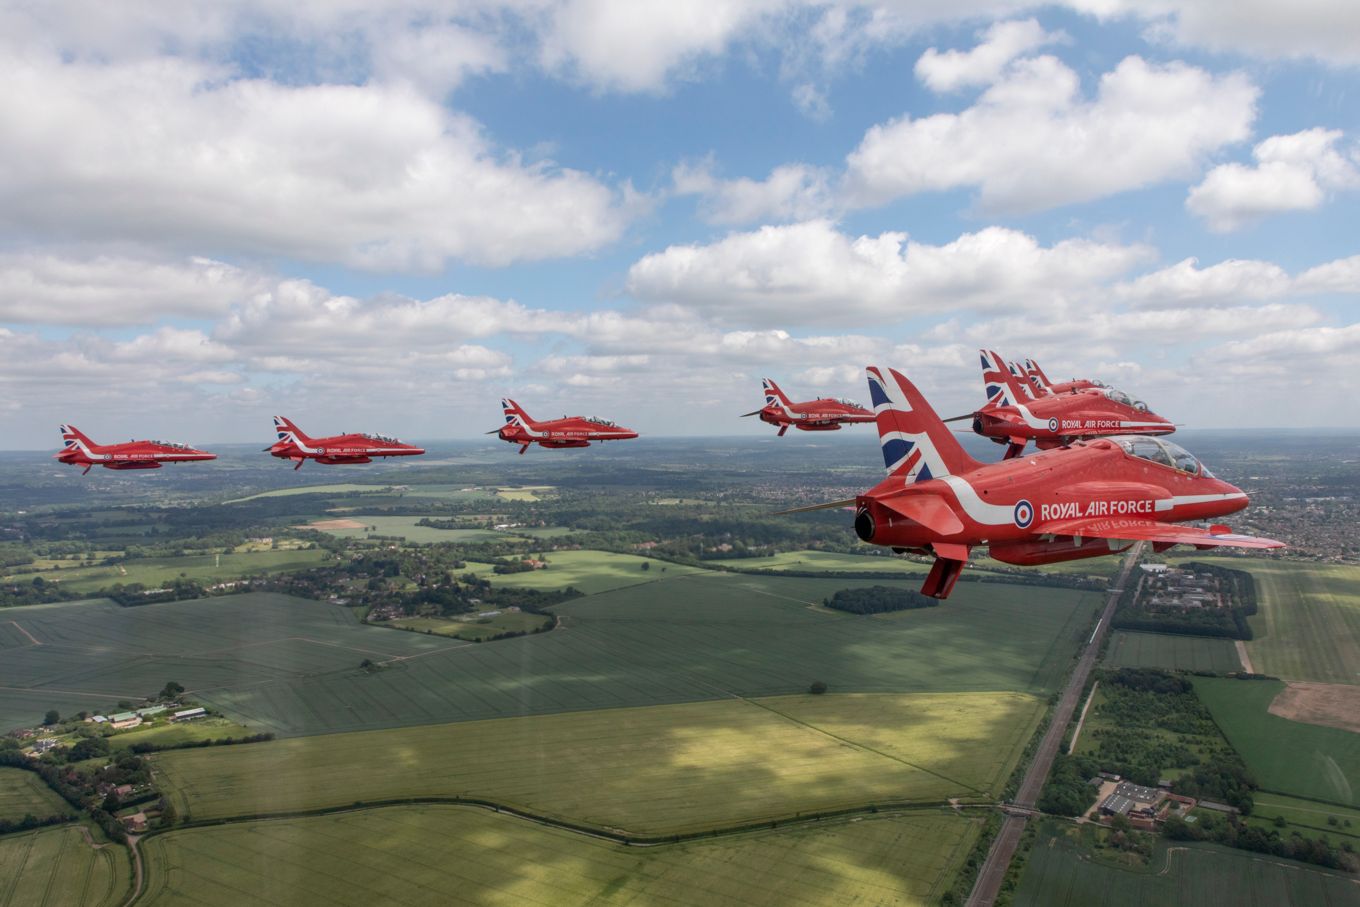 Red Arrows in v formation. 